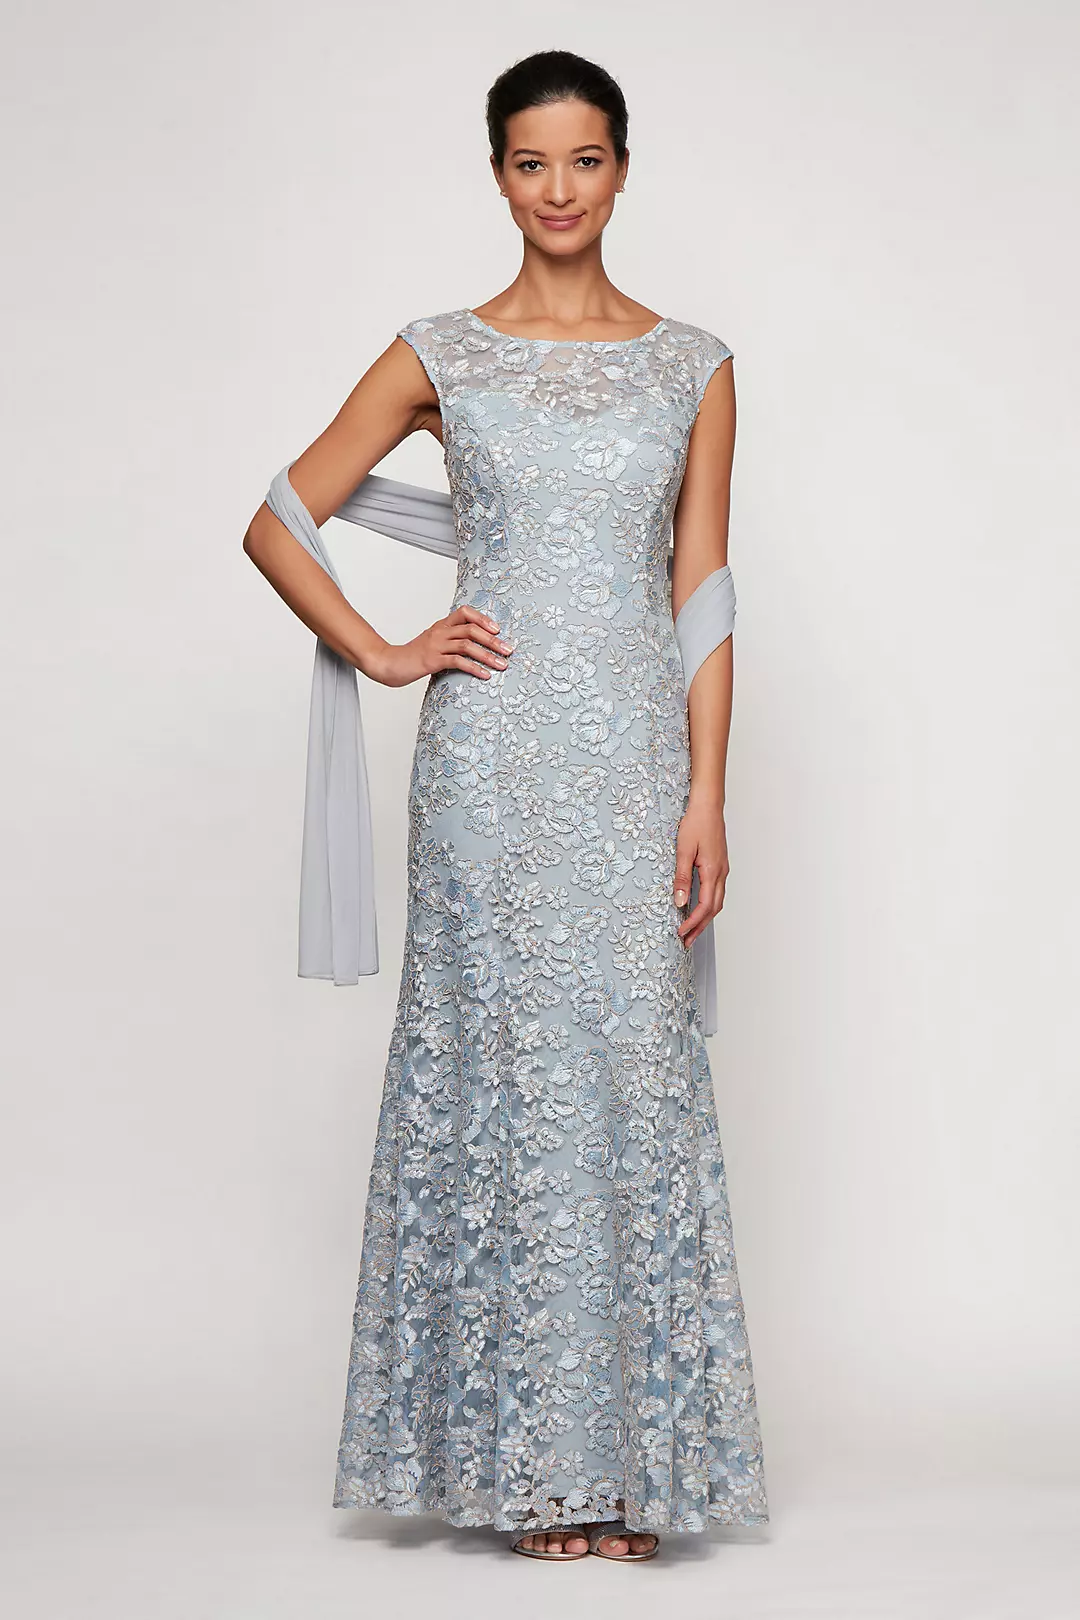 Floral Embroidered Mermaid Dress with Shawl | David's Bridal